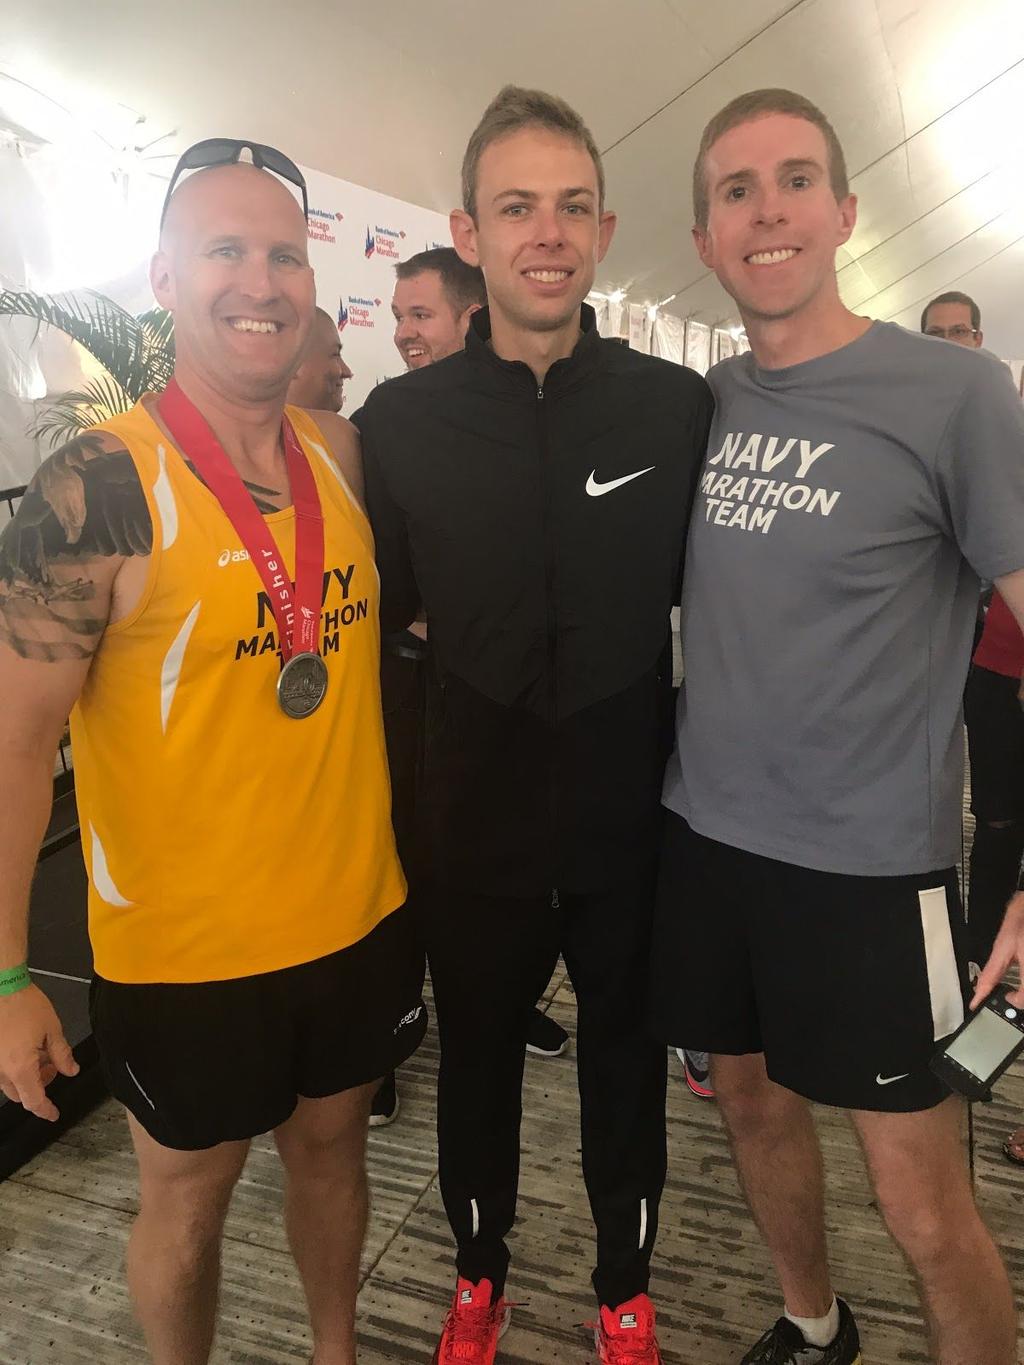 Galen Rupp, who completed the 2017 Bank of America Chicago Marathon with a time of 02:09:20.